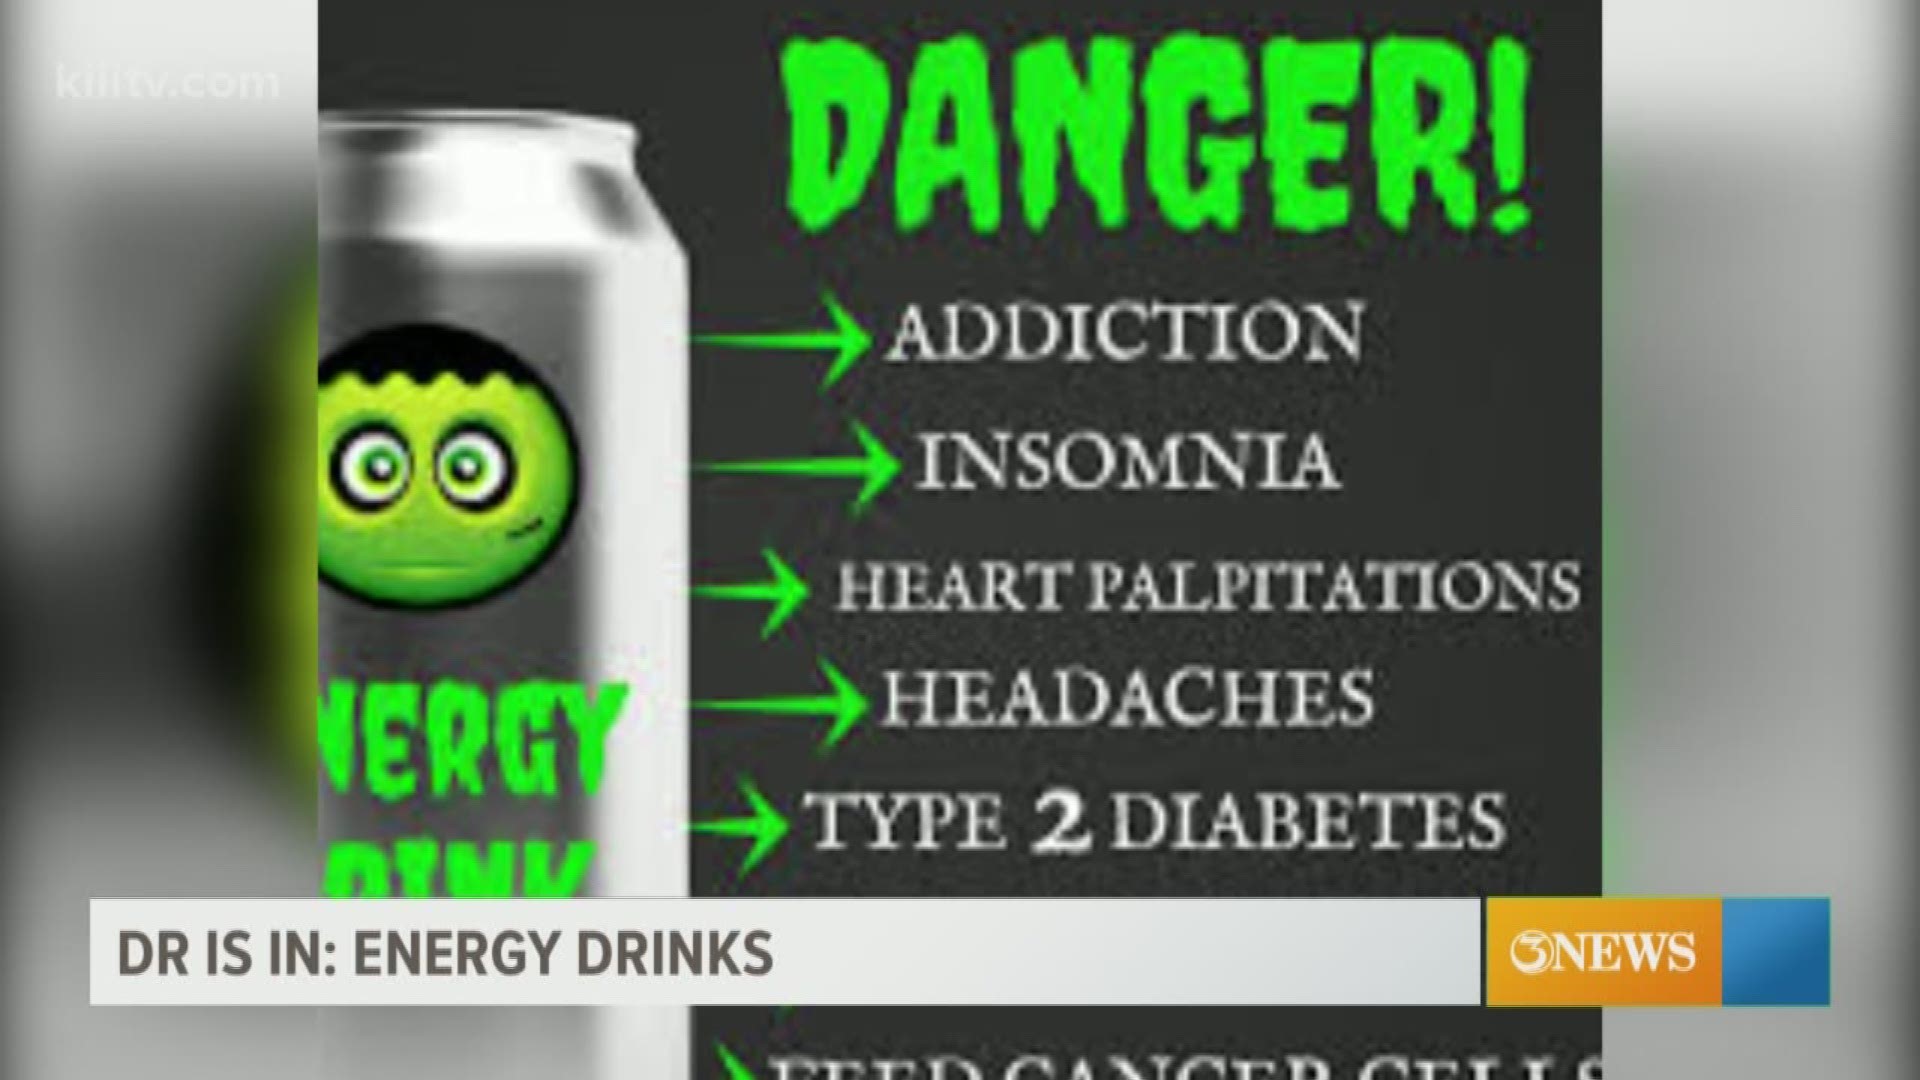 Overuse of energy drinks can lead to several major health issues